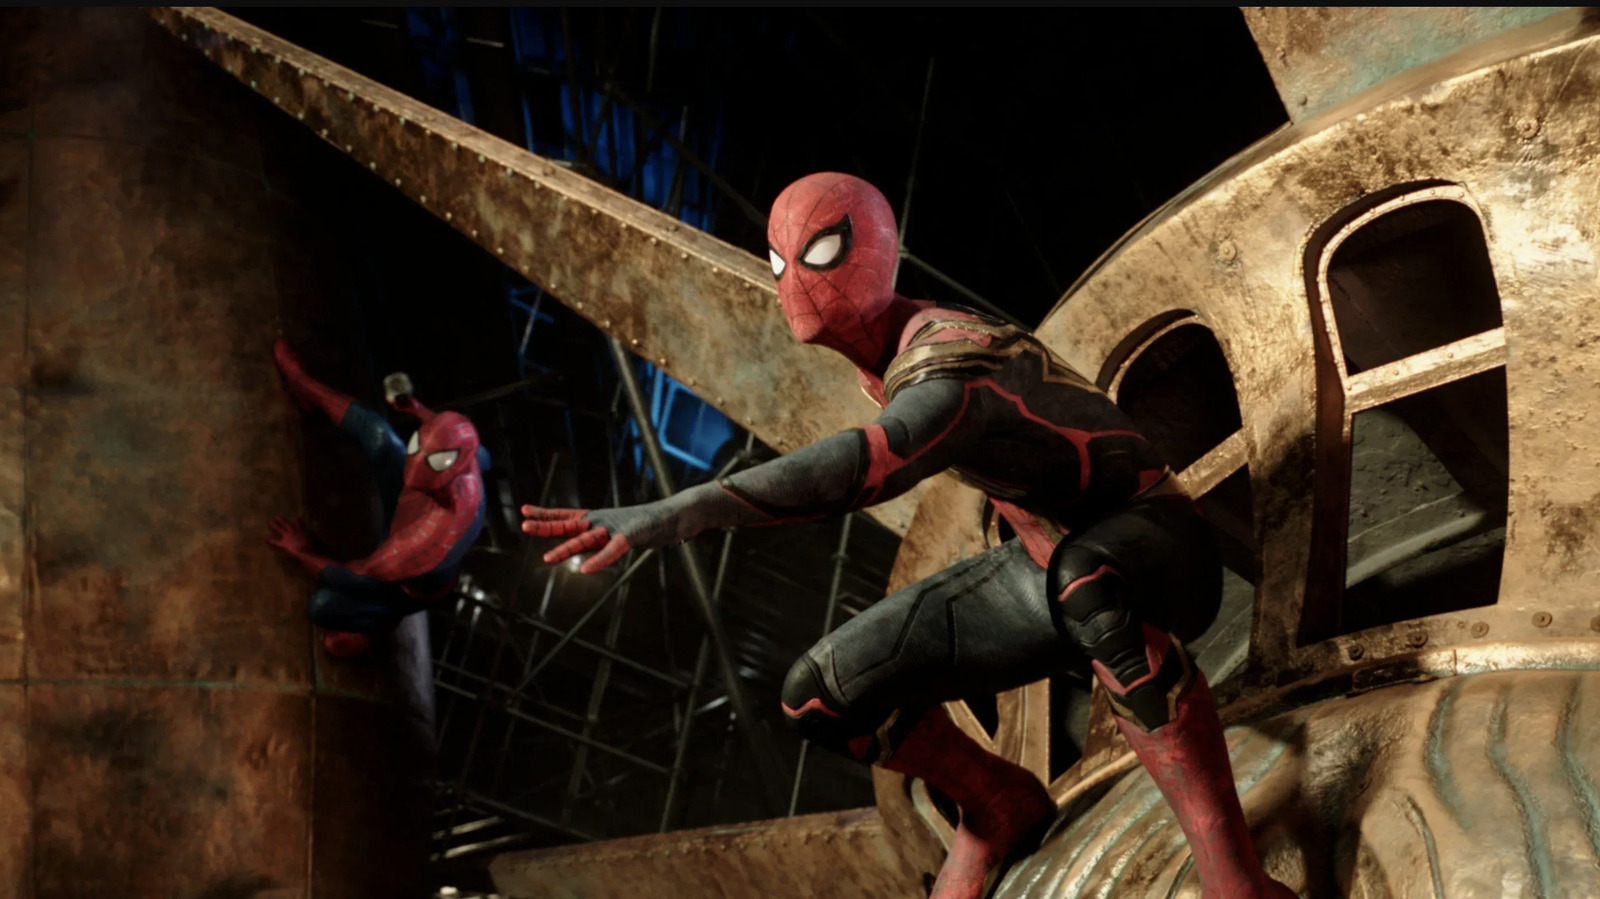 #China Reportedly Asked Sony To Remove The Statue Of Liberty From Spider-Man: No Way Home